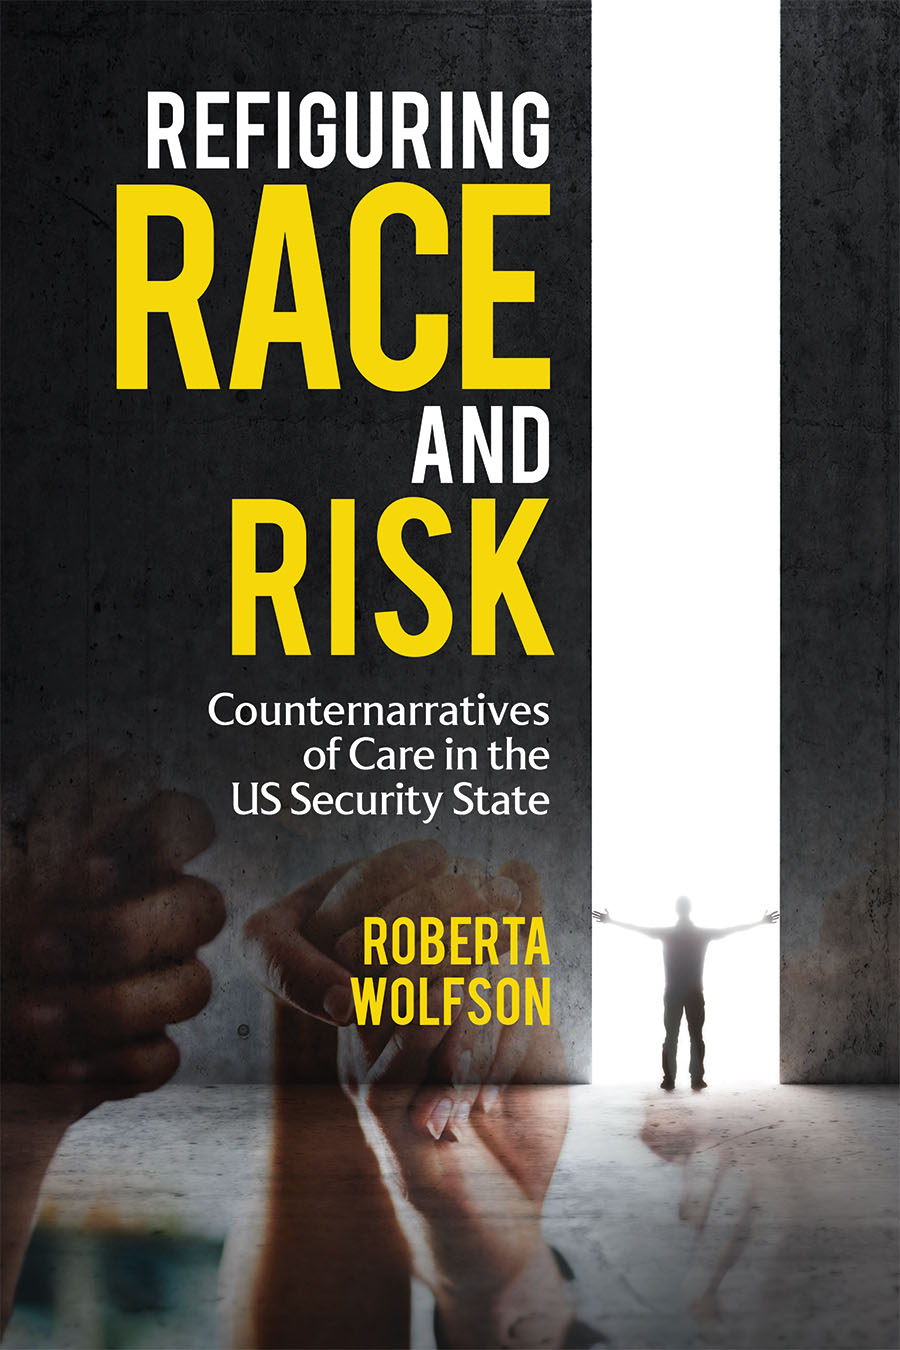 Front cover of Refiguring Race and Risk: Counternarratives of Care in the US Security State by Roberta Wolfson, featuring clasped hands overlaid in front of a man pushing through a gap in a wall.